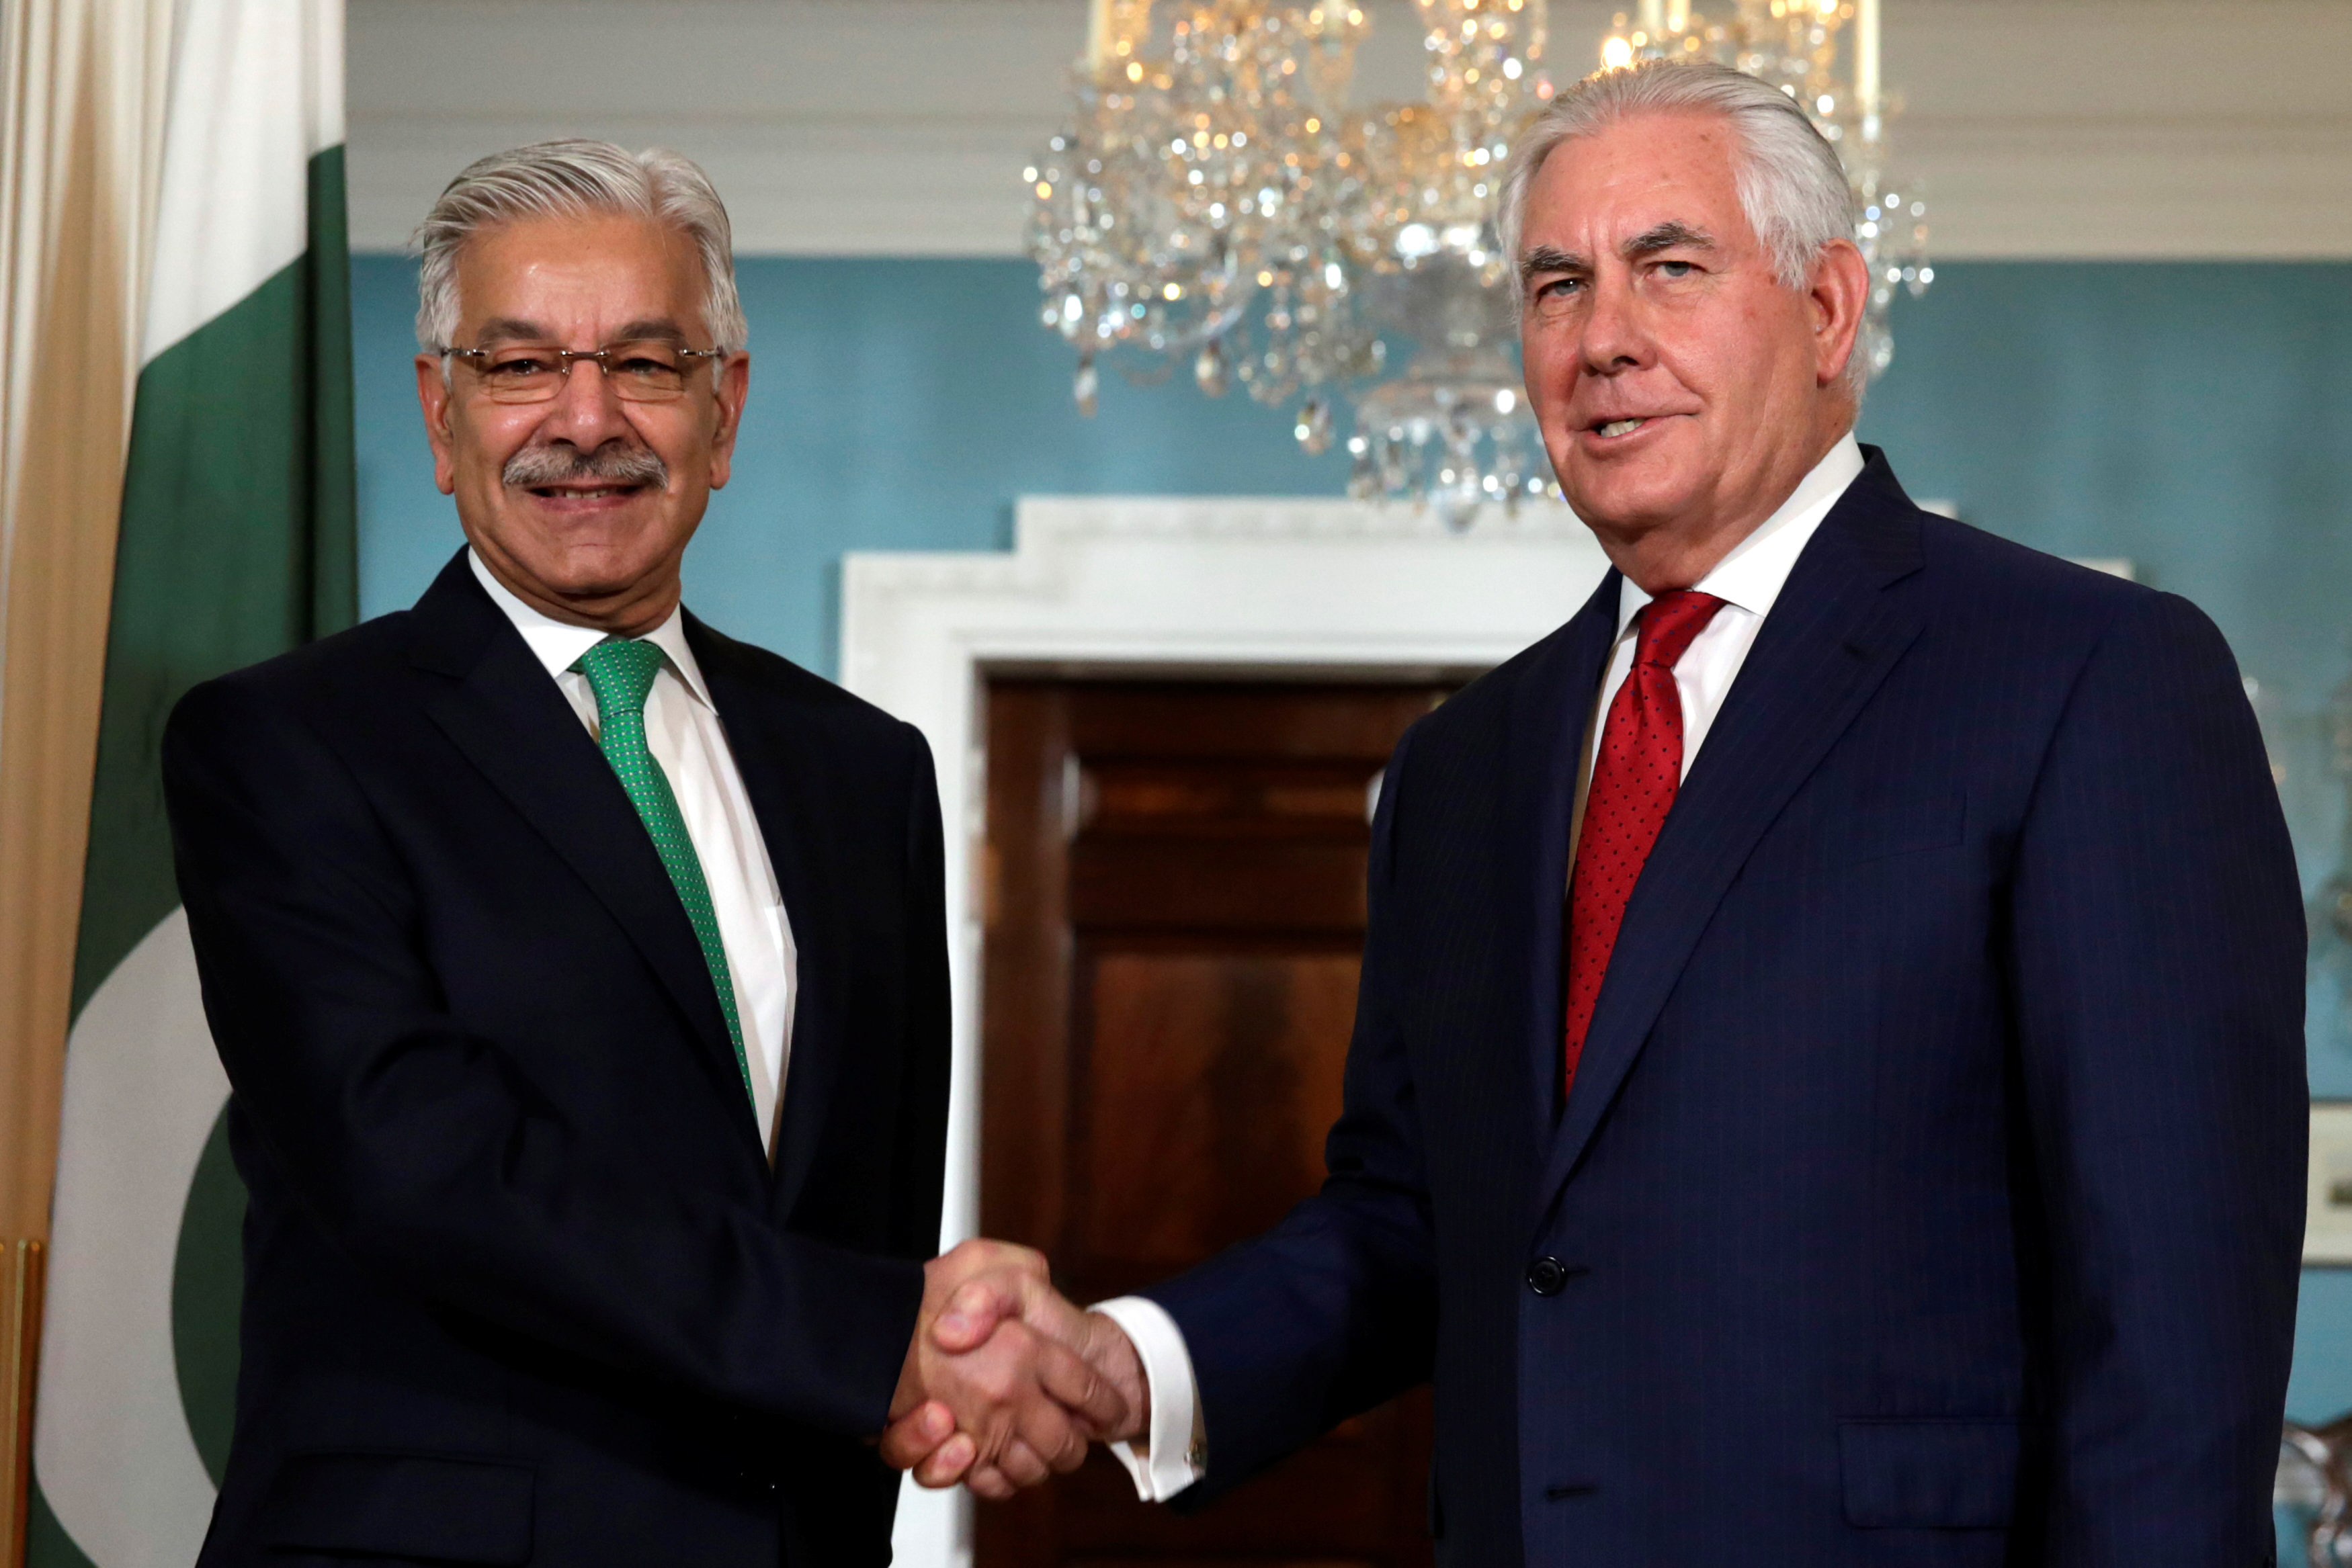 u s secretary of state rex tillerson r shakes hands with foreign minister khawaja asif before their meeting at the state department in washington u s october 4 2017 photo reuters